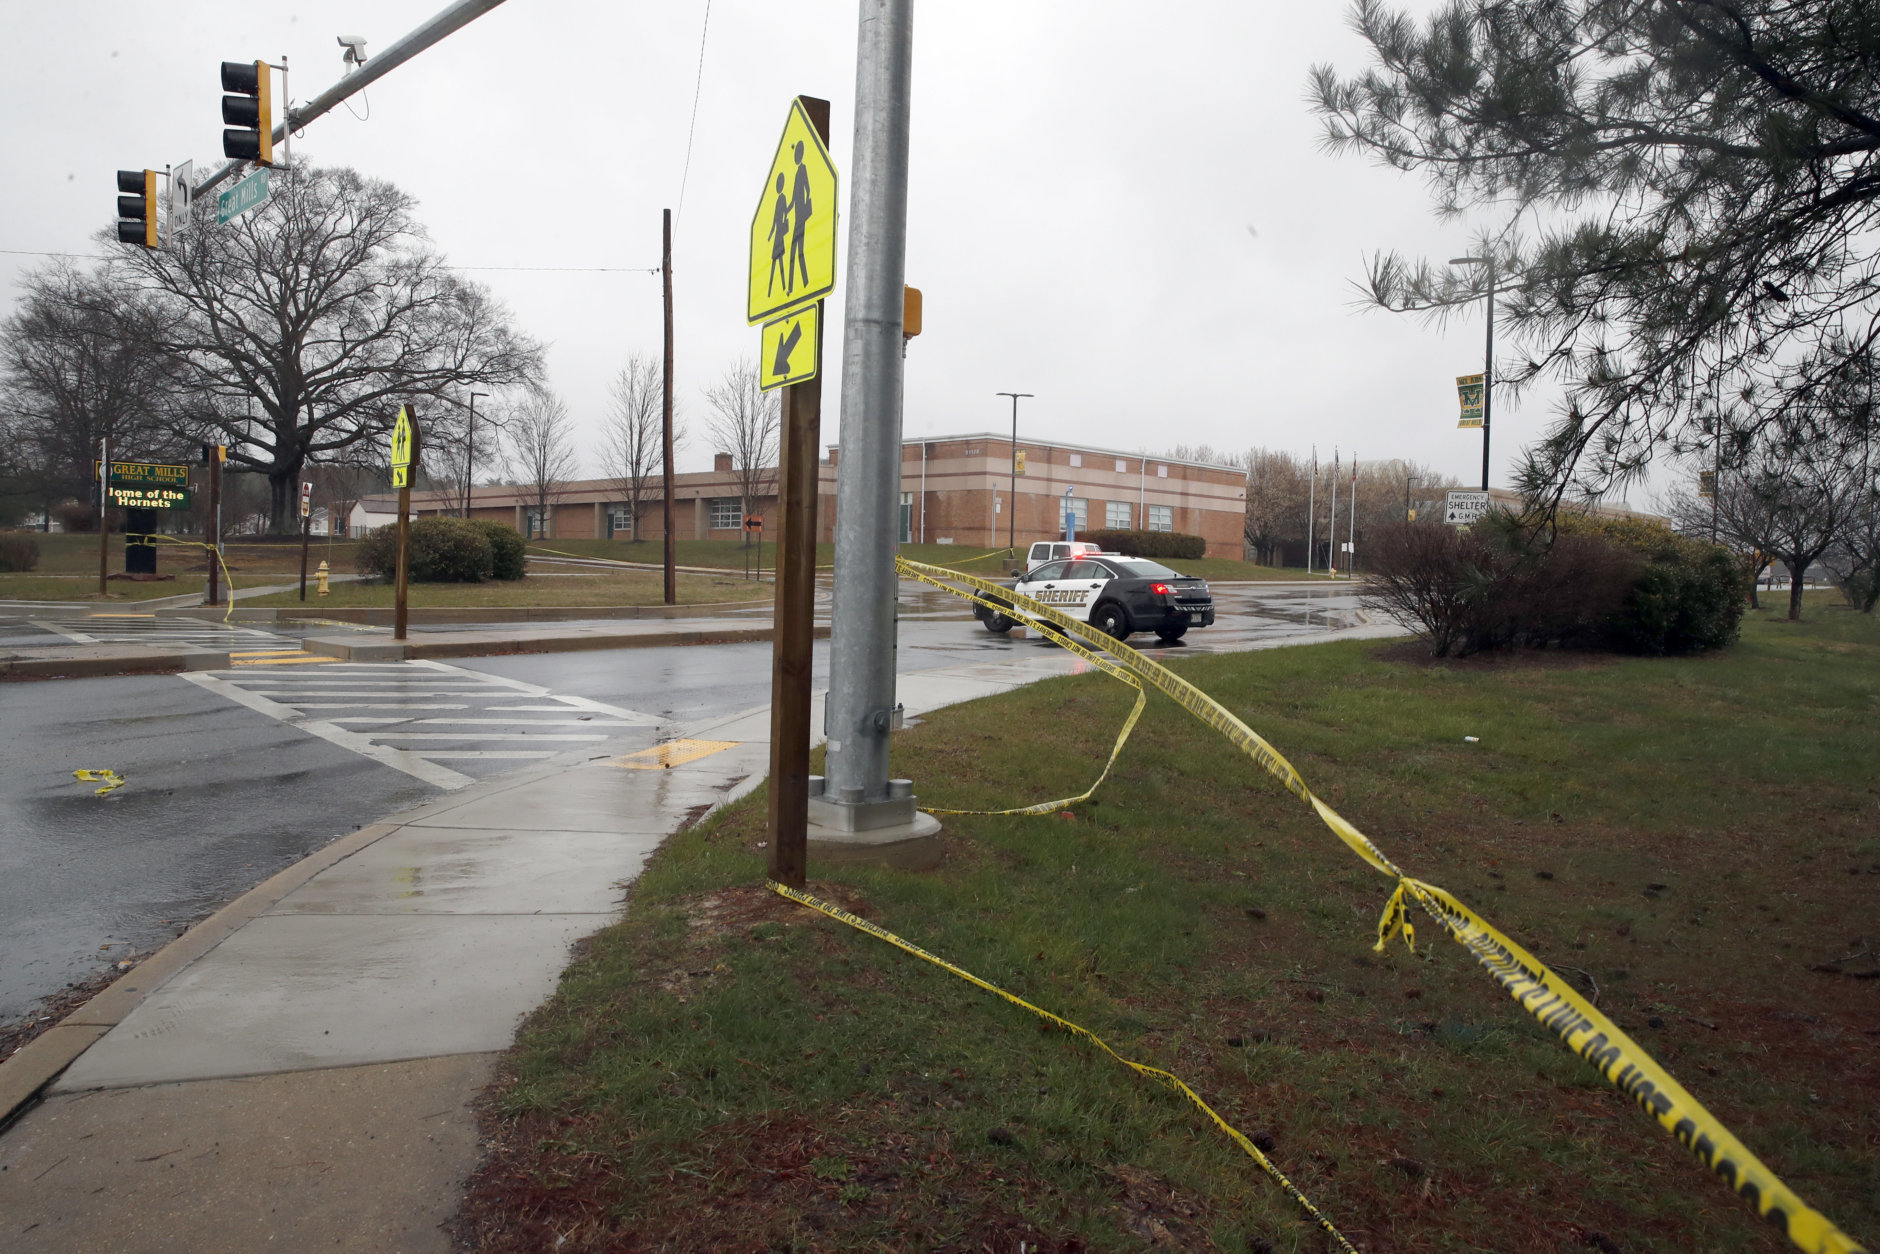 Crime scene tape is used around Great Mills High School, the scene of a shooting, Tuesday, March 20, 2018, in Great Mills.A student with a handgun shot two classmates inside the school before he was fatally wounded during a confrontation with a school resource officer, a sheriff said.  (AP Photo/Alex Brandon)